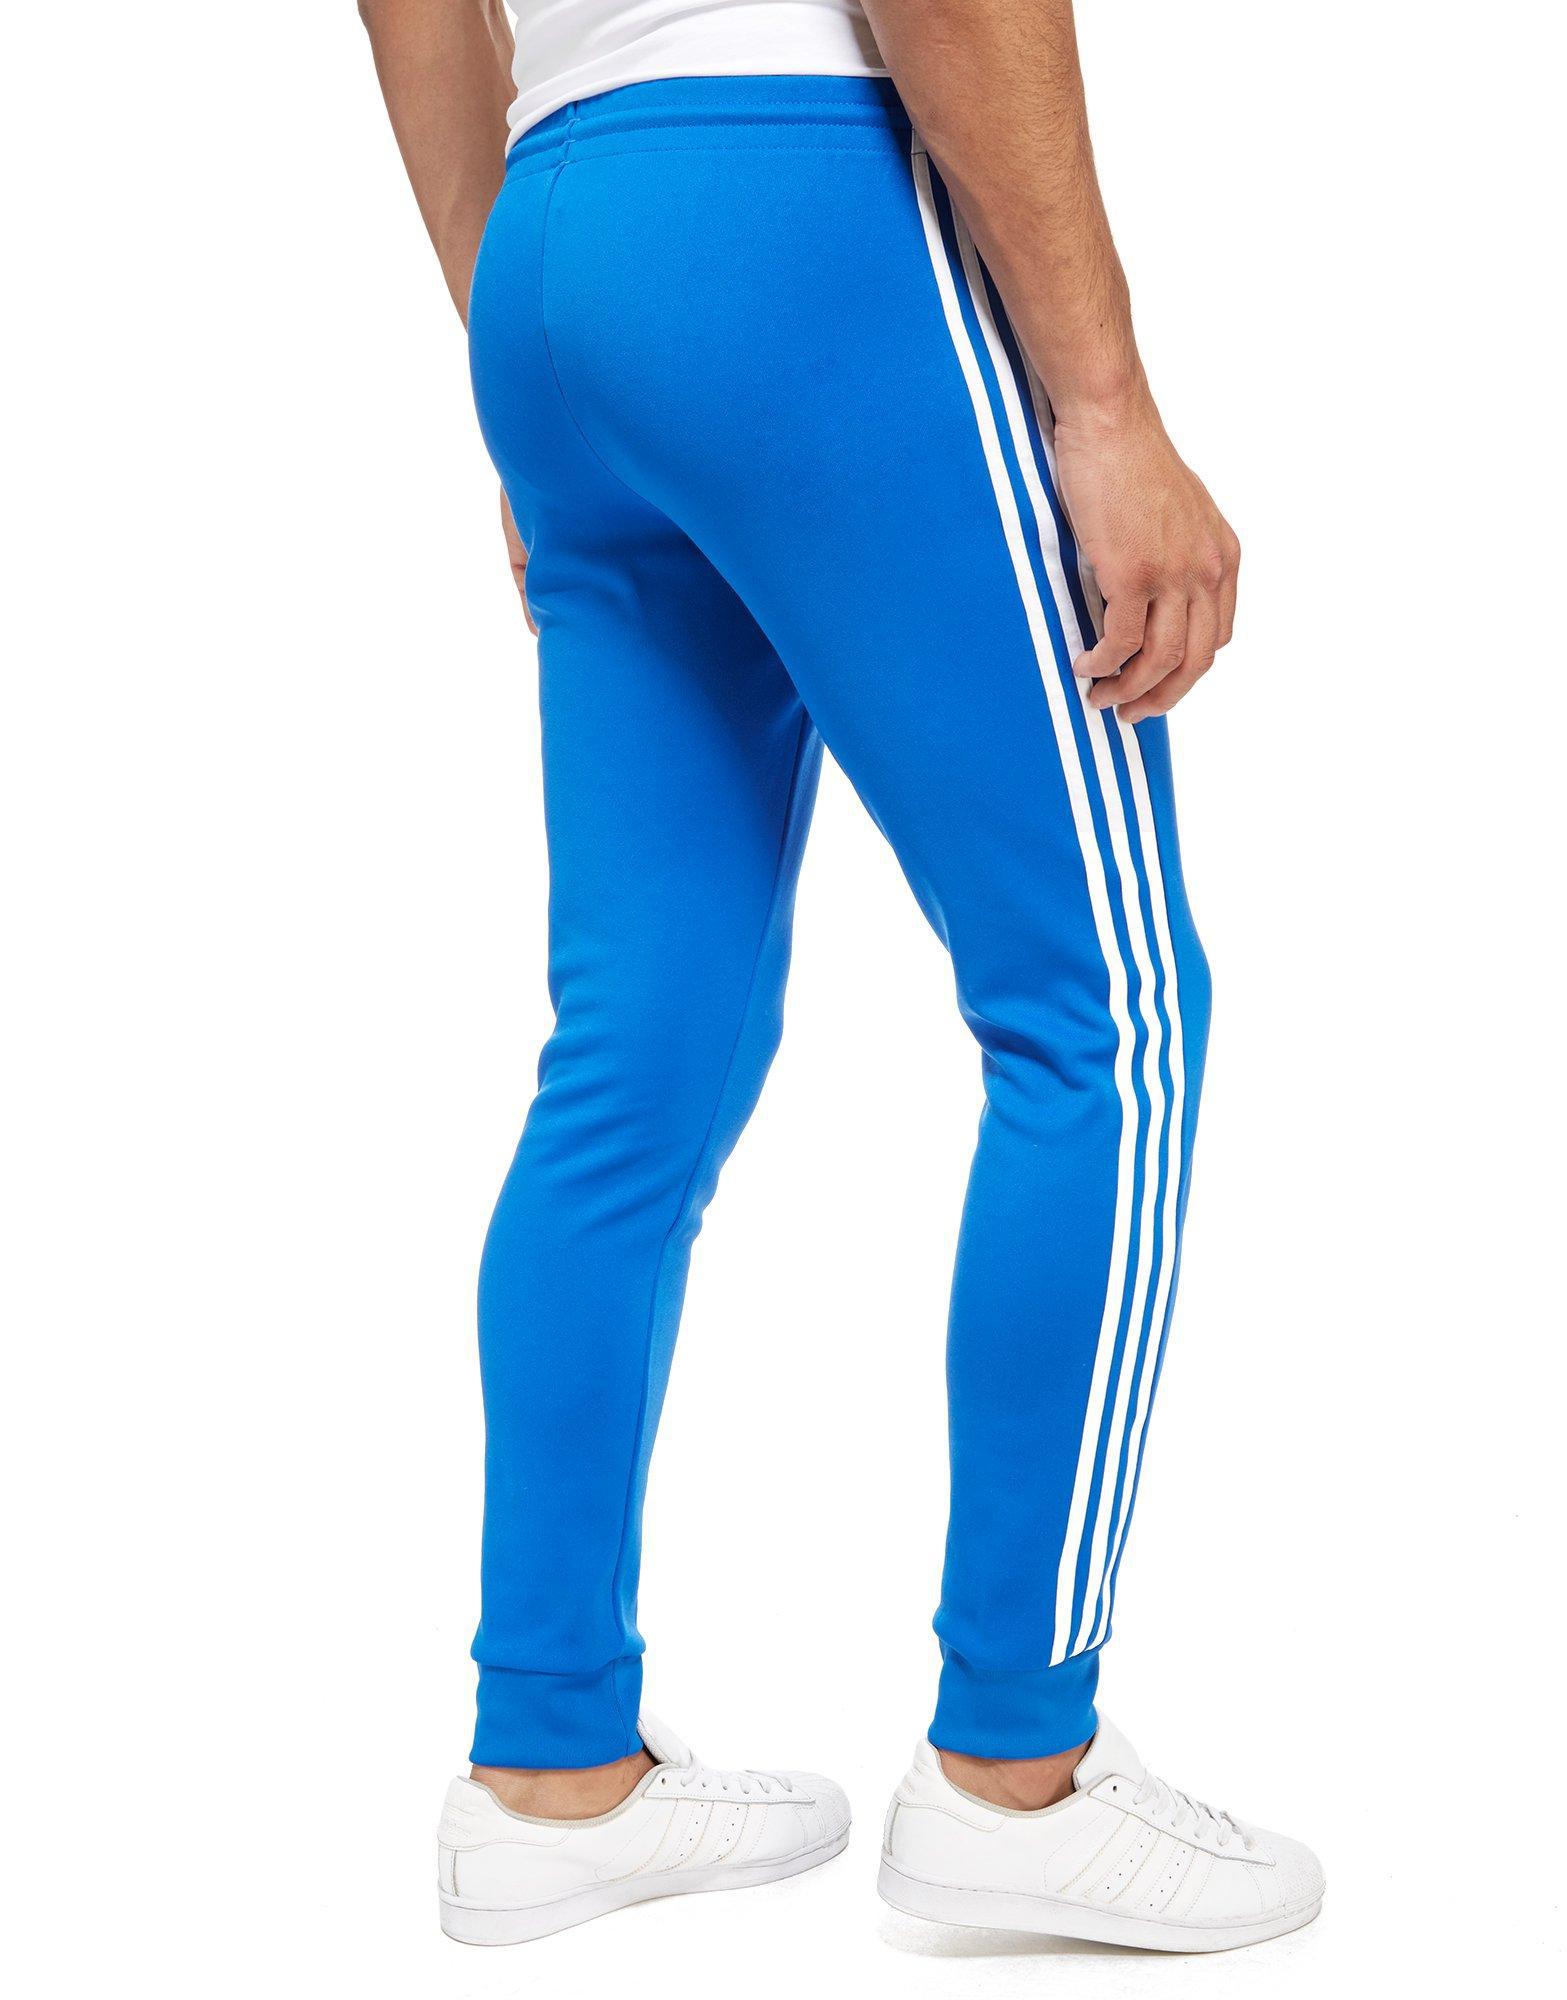 adidas Originals Synthetic 3-stripes Superstar Track Pants in Blue for